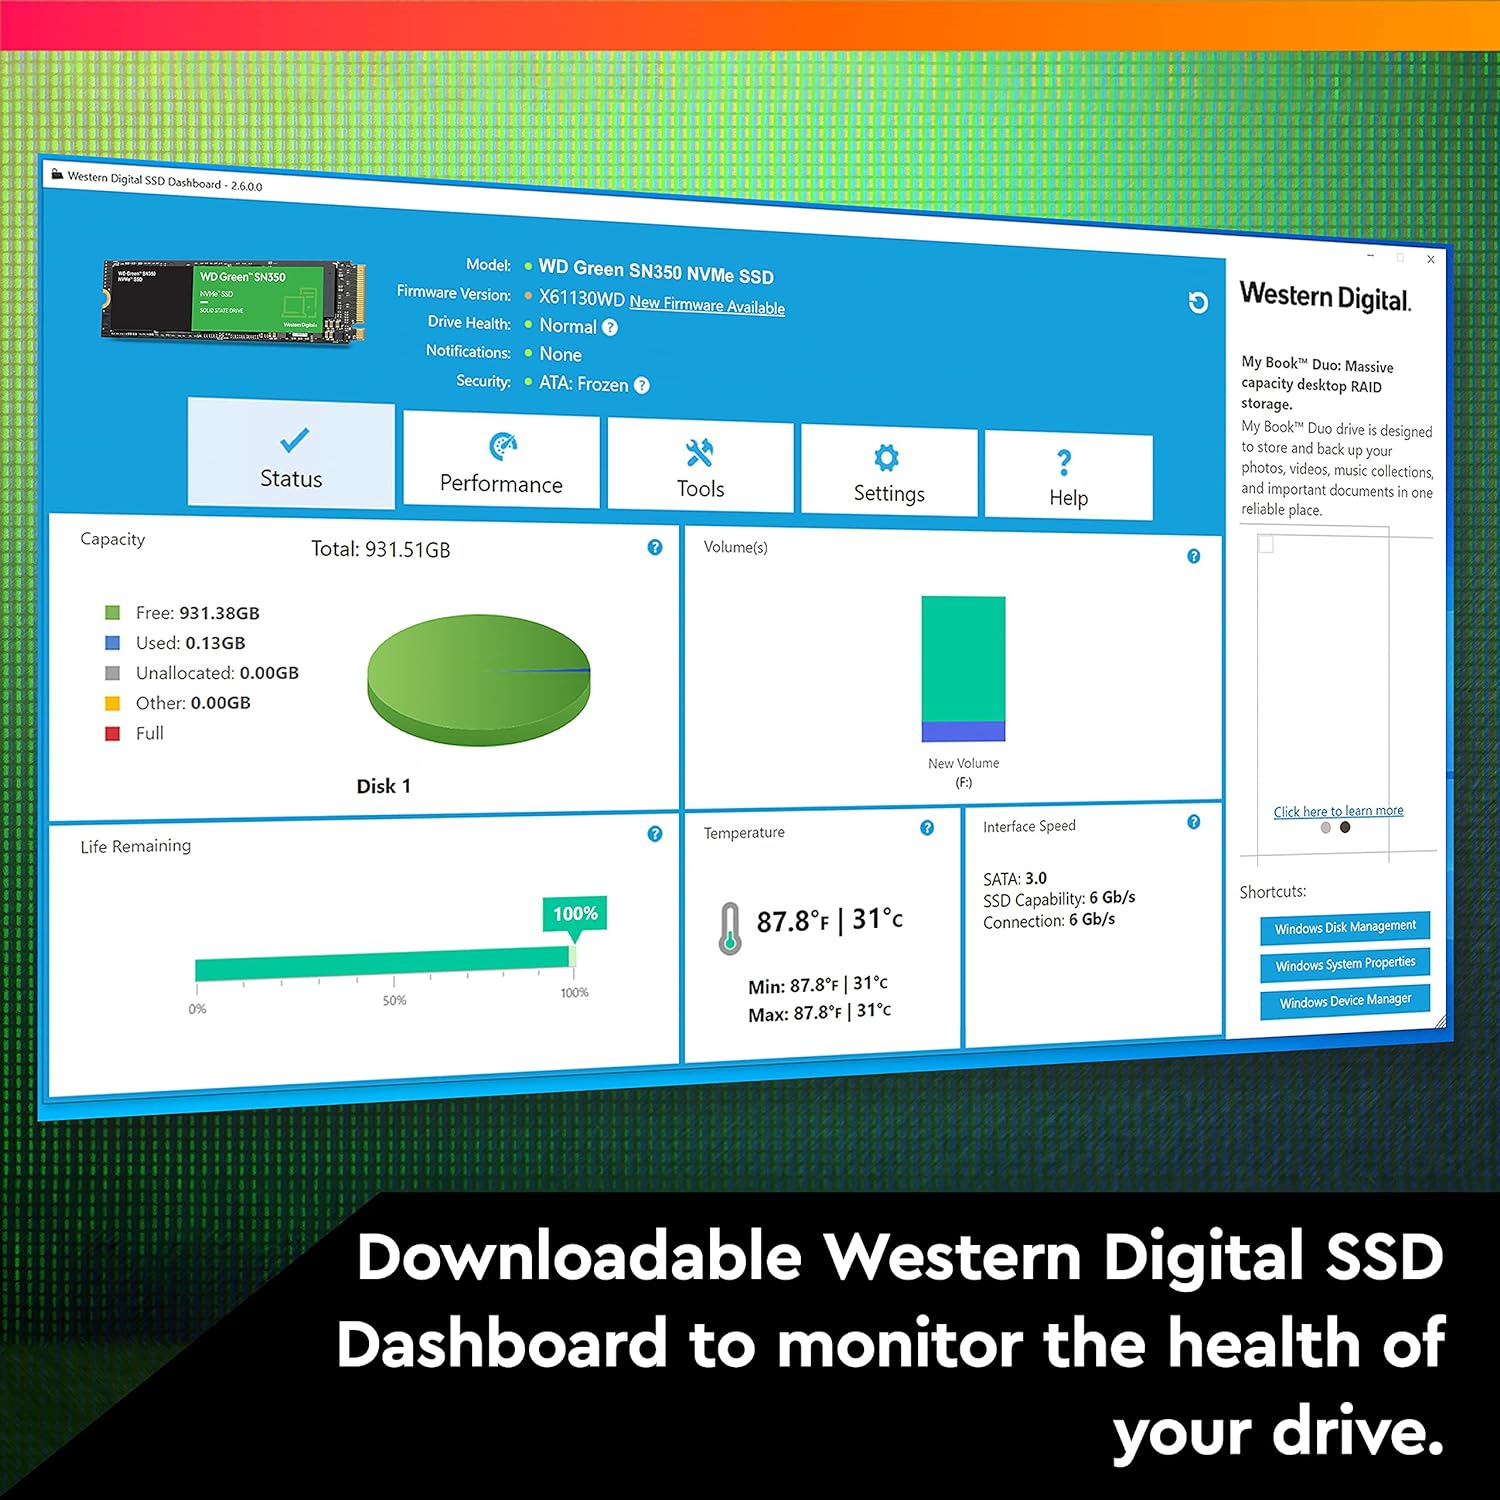 Western Digital 960GB WD Green SN350 NVMe Internal SSD Solid State Drive - Gen3 PCIe, M.2 2280, Up to 2,400 MB/s - WDS960G2G0C